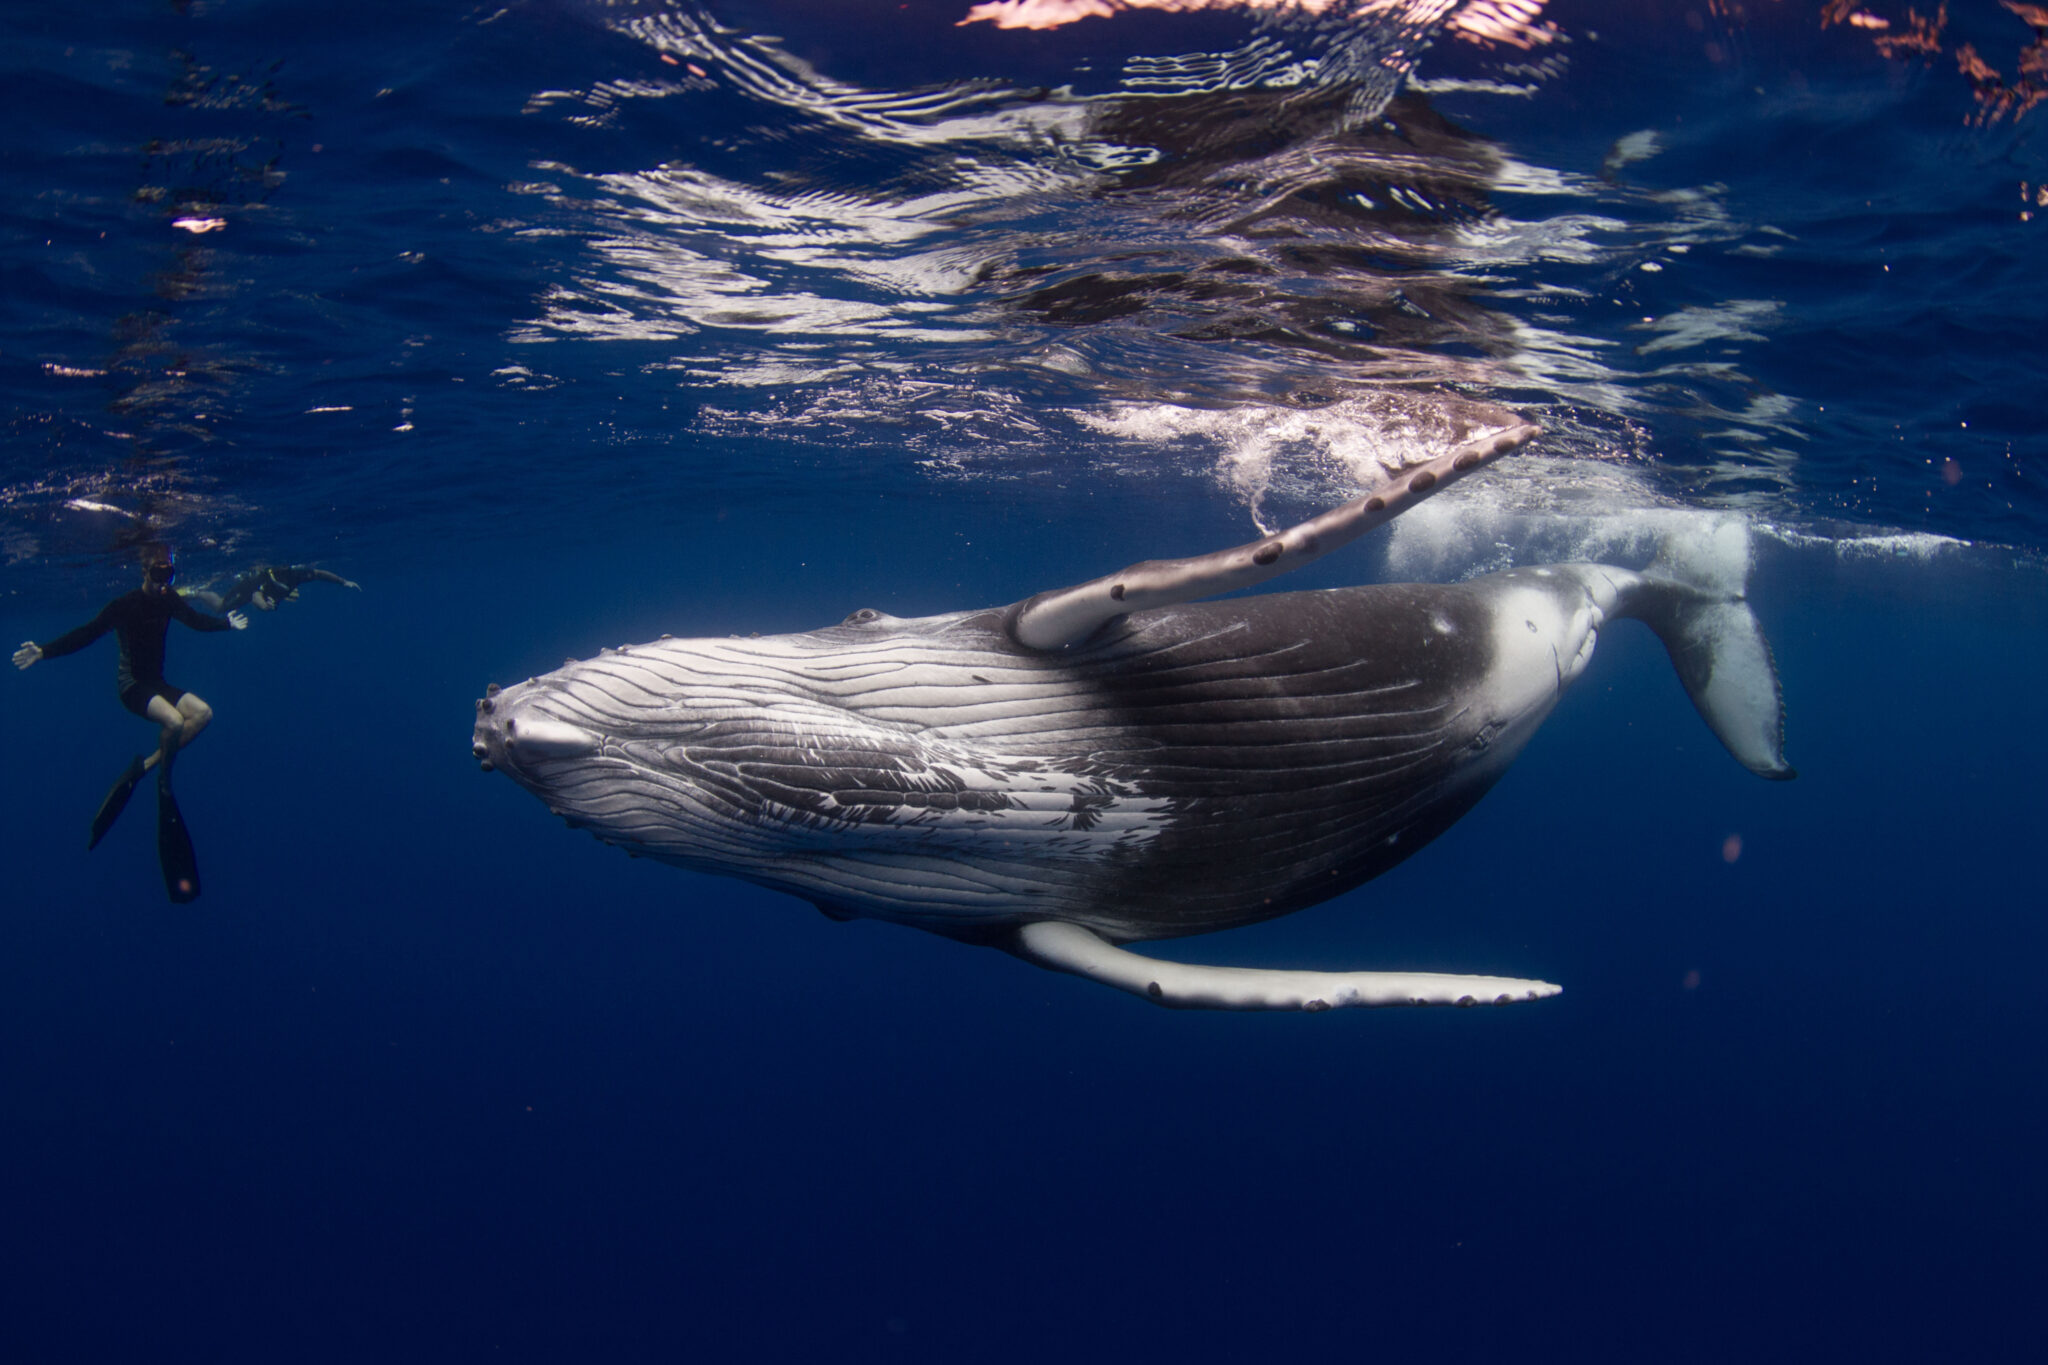 A skin diver gets close to a humpback whale, one of the benefits of snorkeling and why it makes a popular scuba alternative